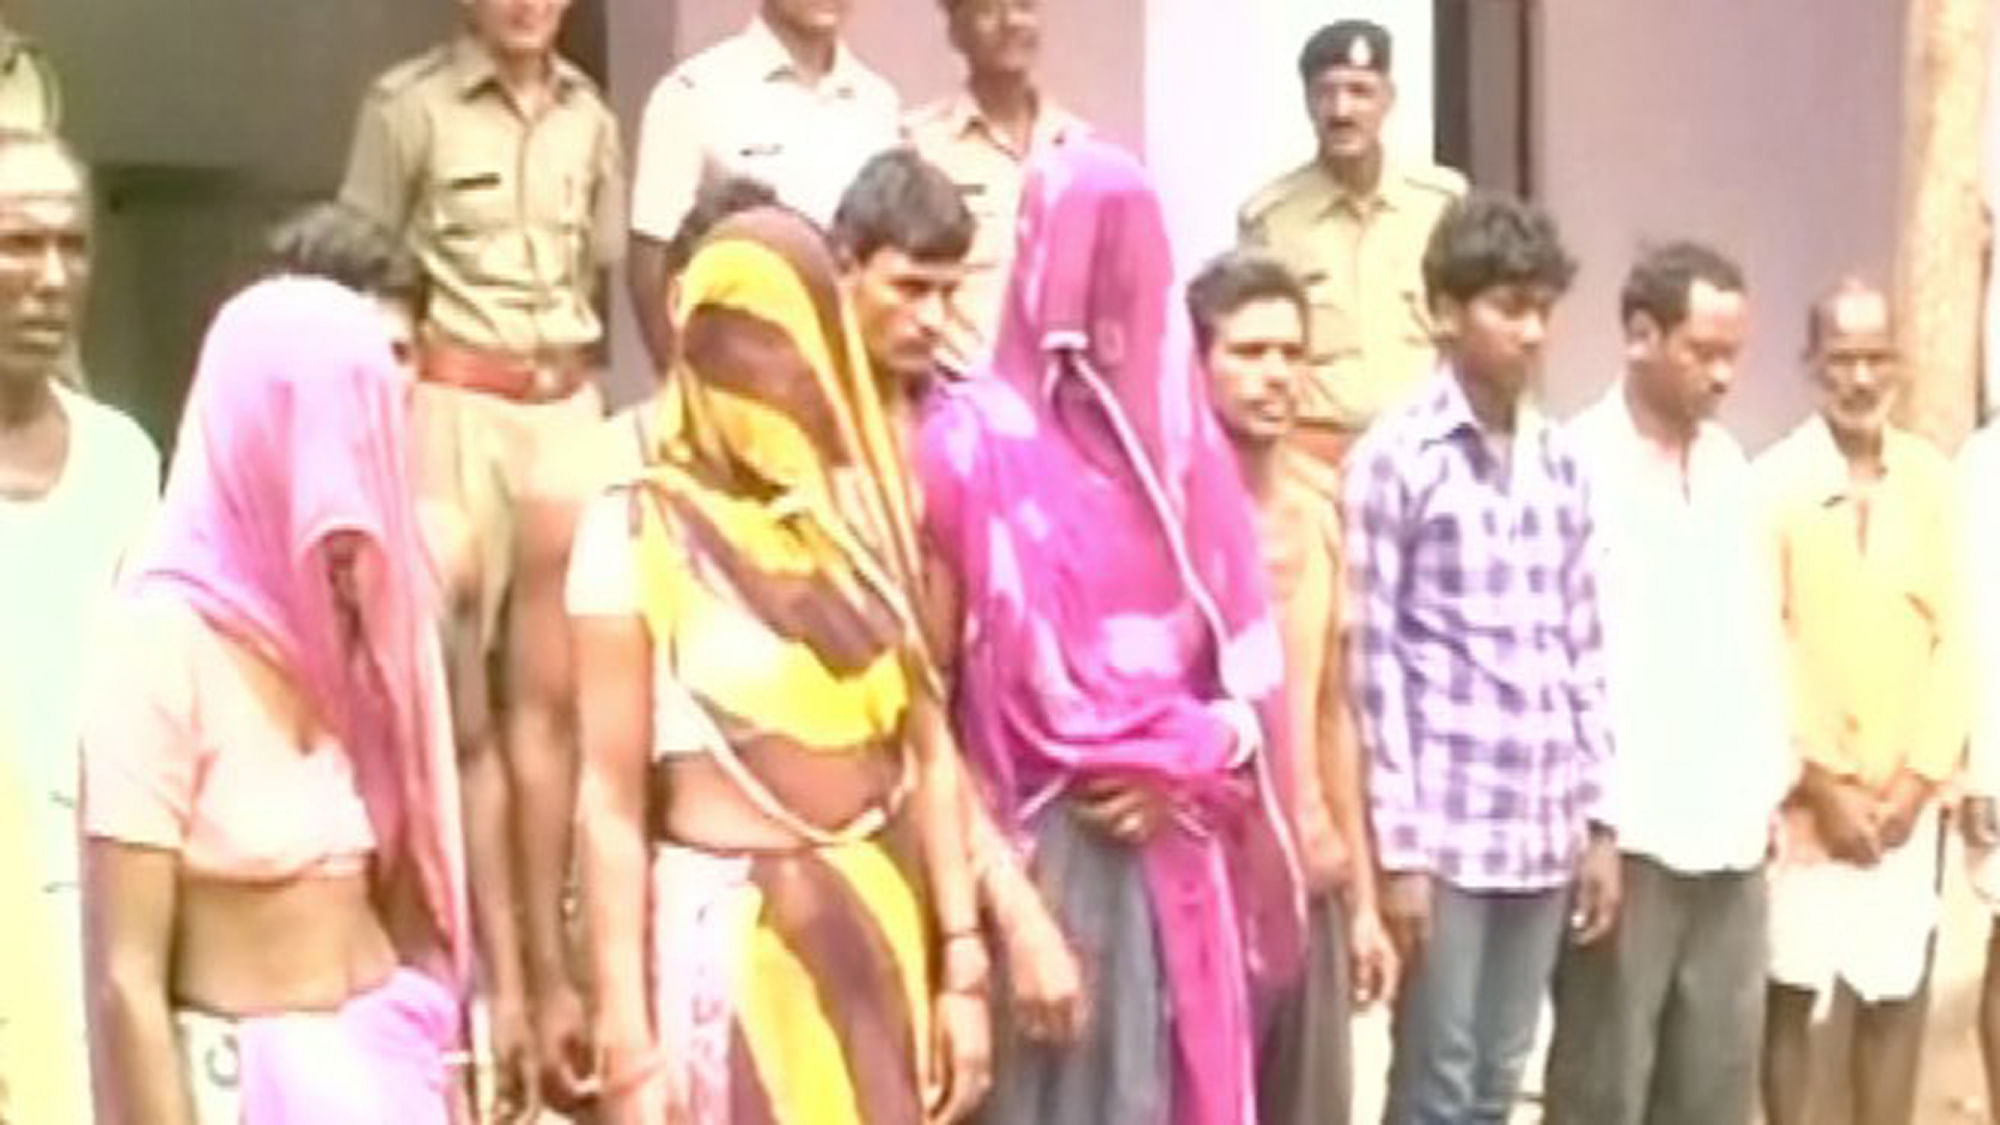 Last week 14 people were arrested in connection with the incident. (Photo: ANI)